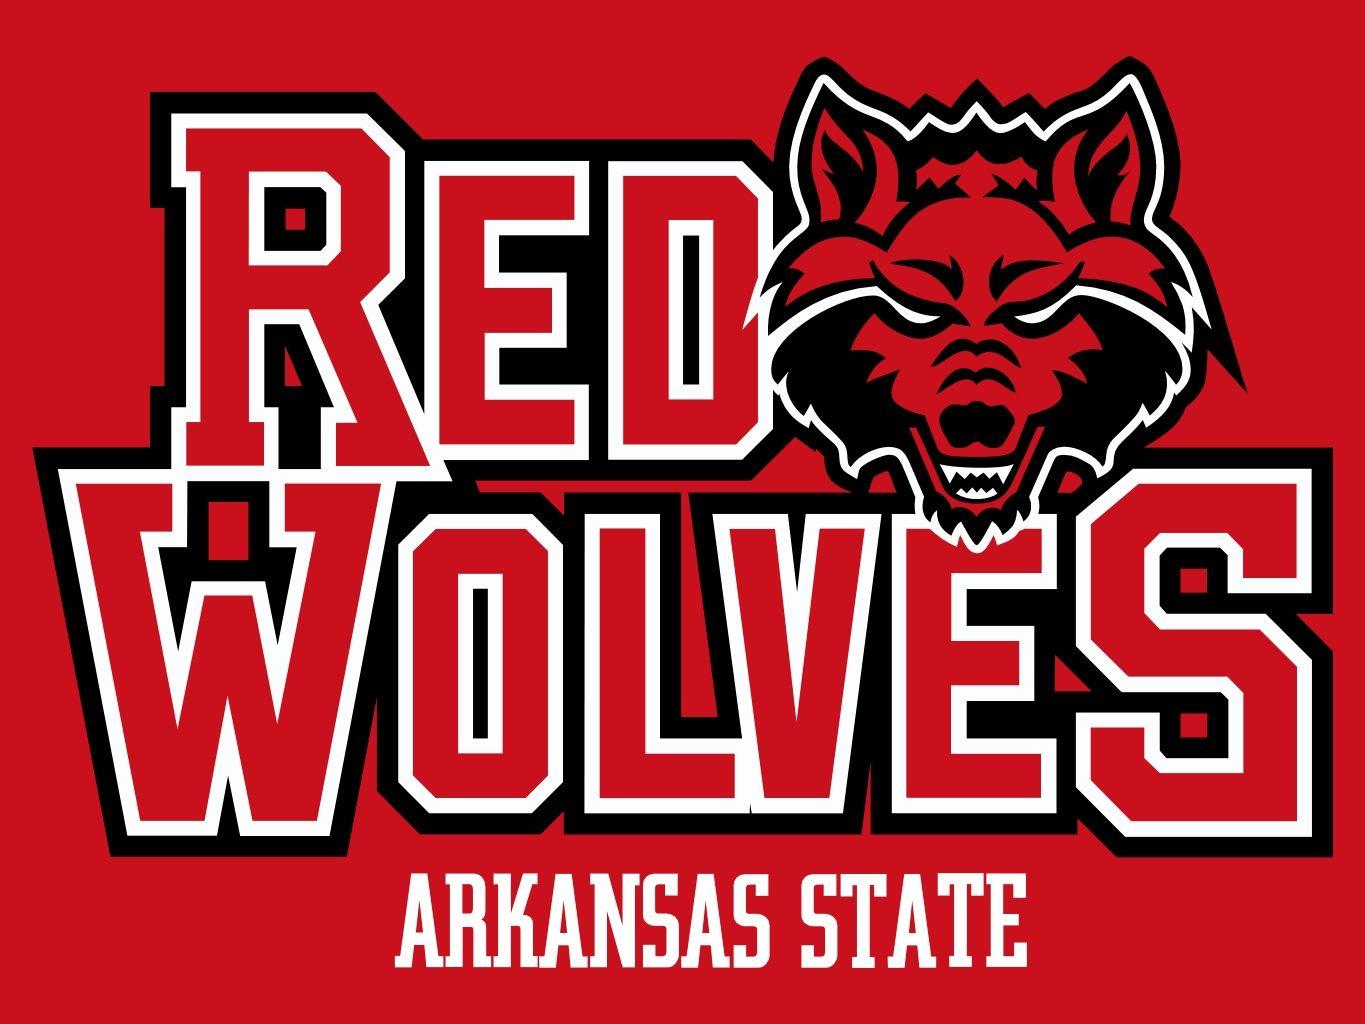 Red Wolves Arkansas Logo - Arkansas State Red Wolves | NCAA Football Wiki | FANDOM powered by Wikia